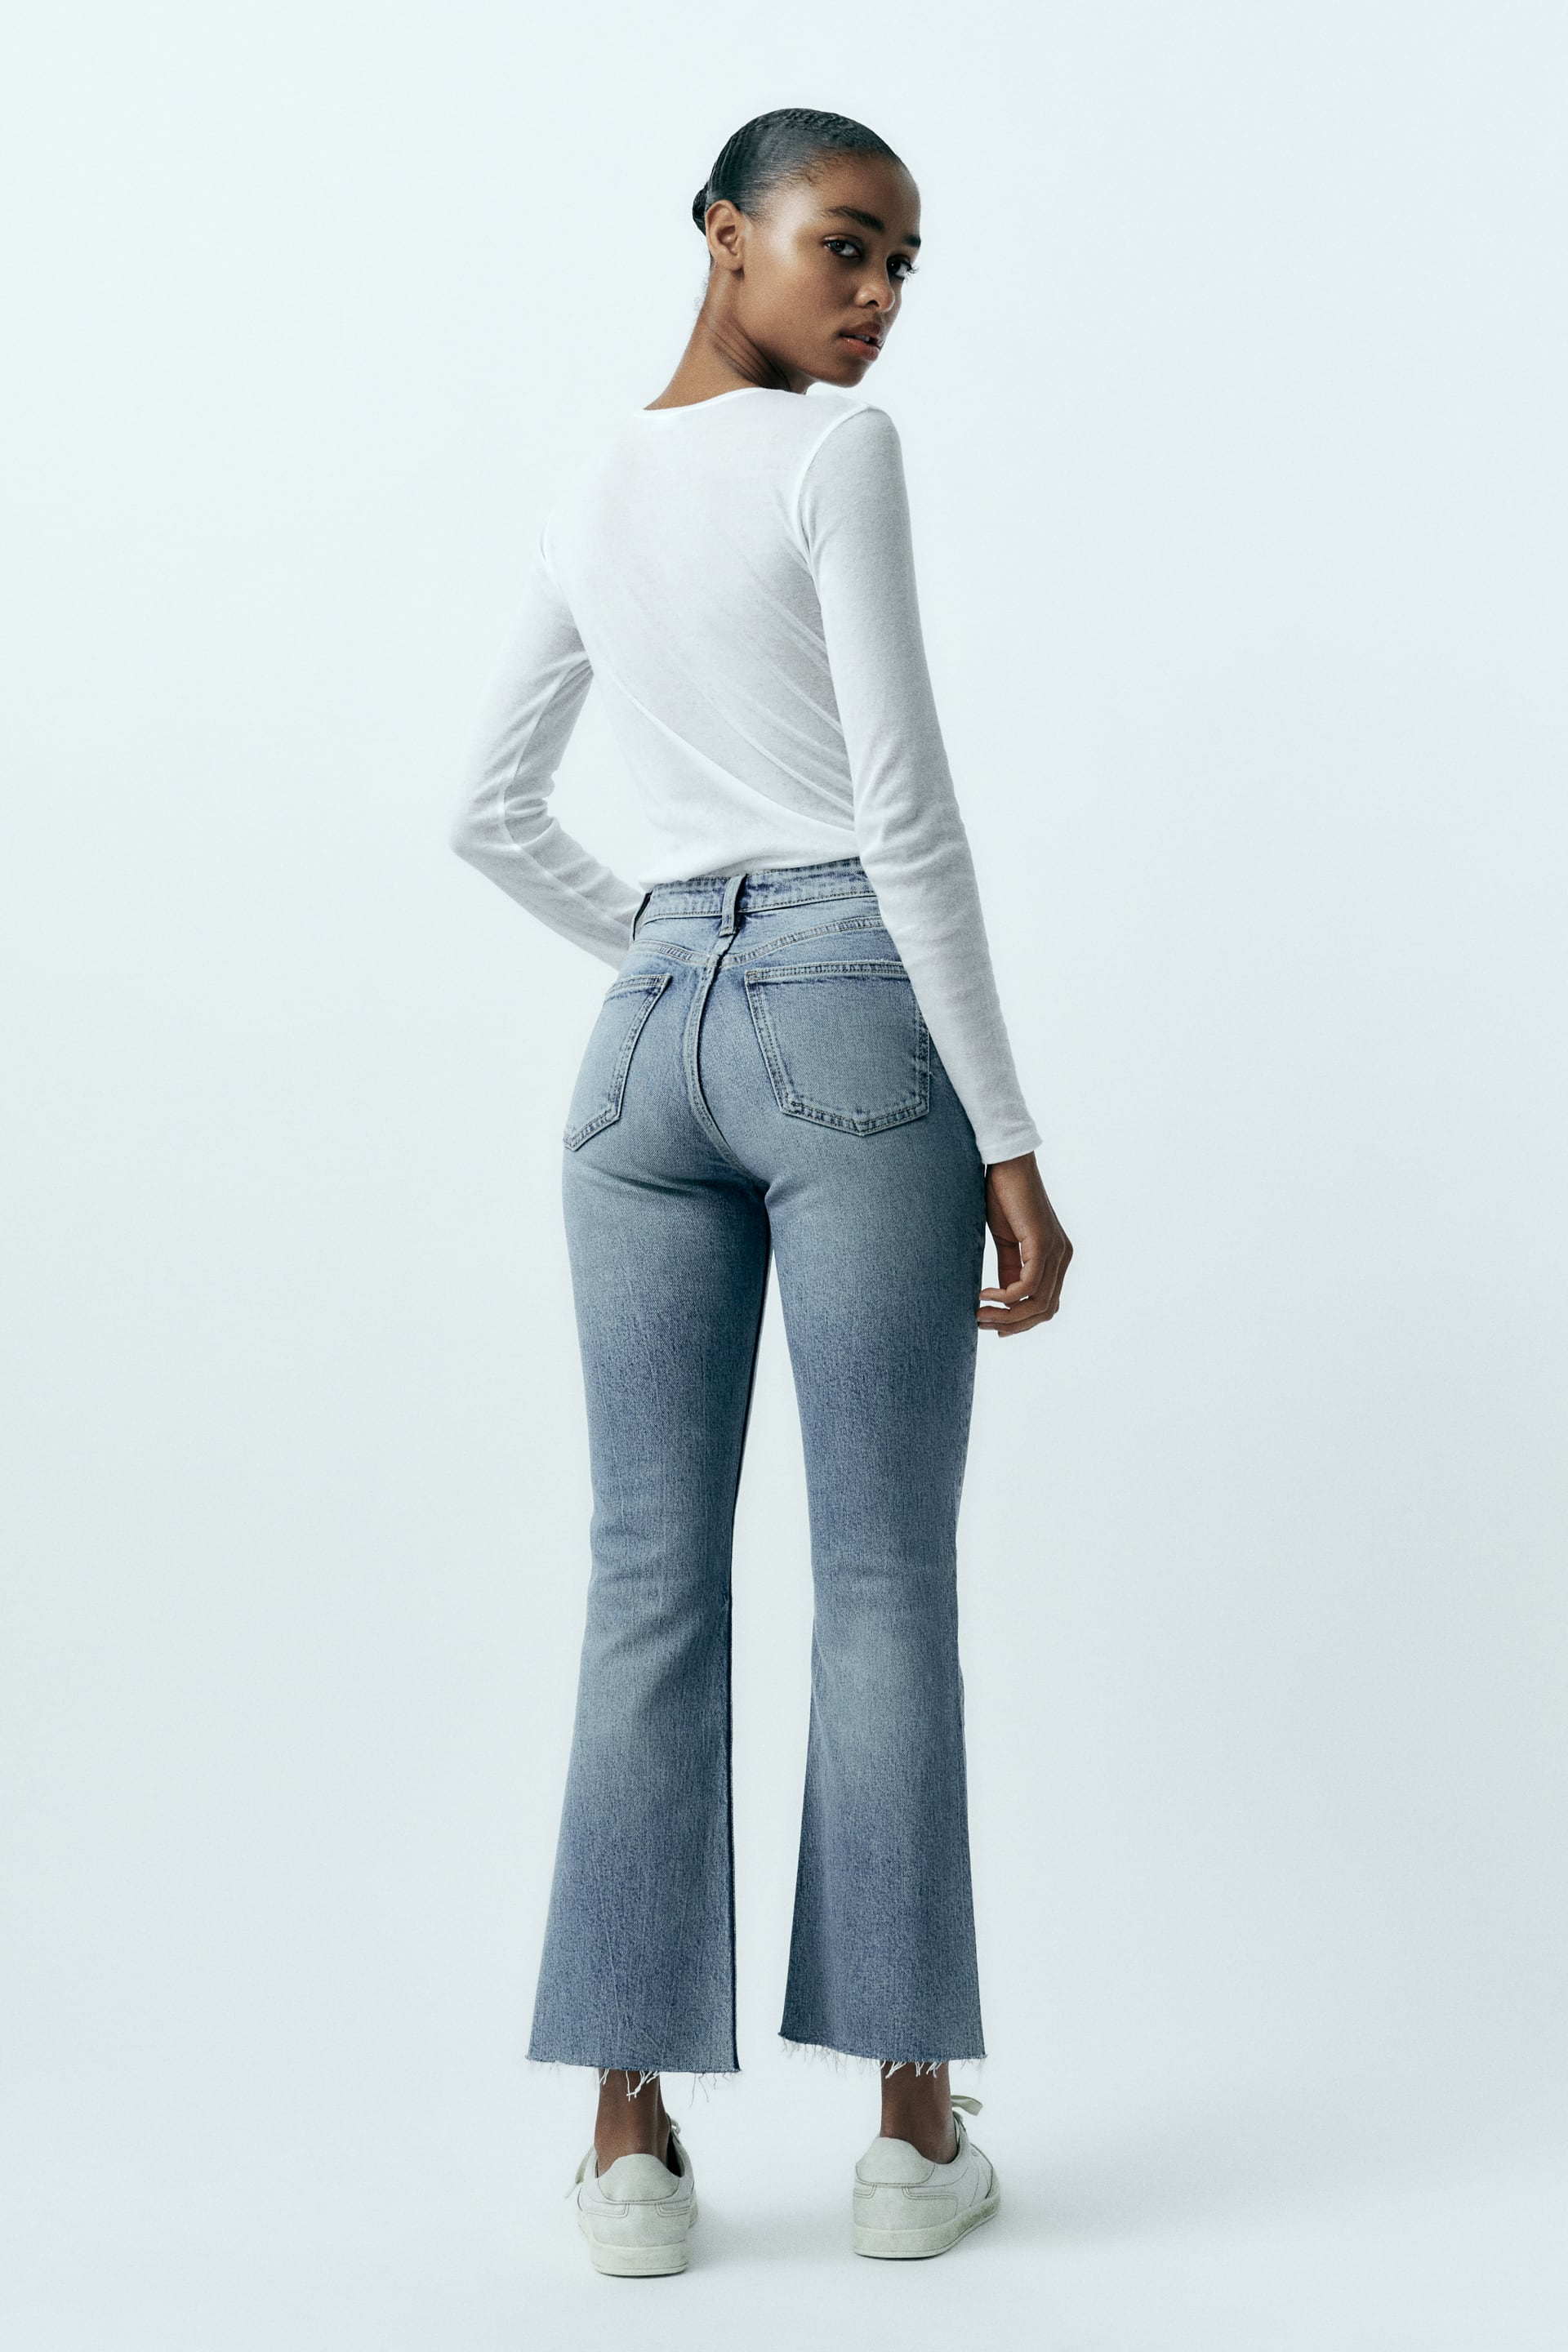 Women's Mid Rise Flare Jeans